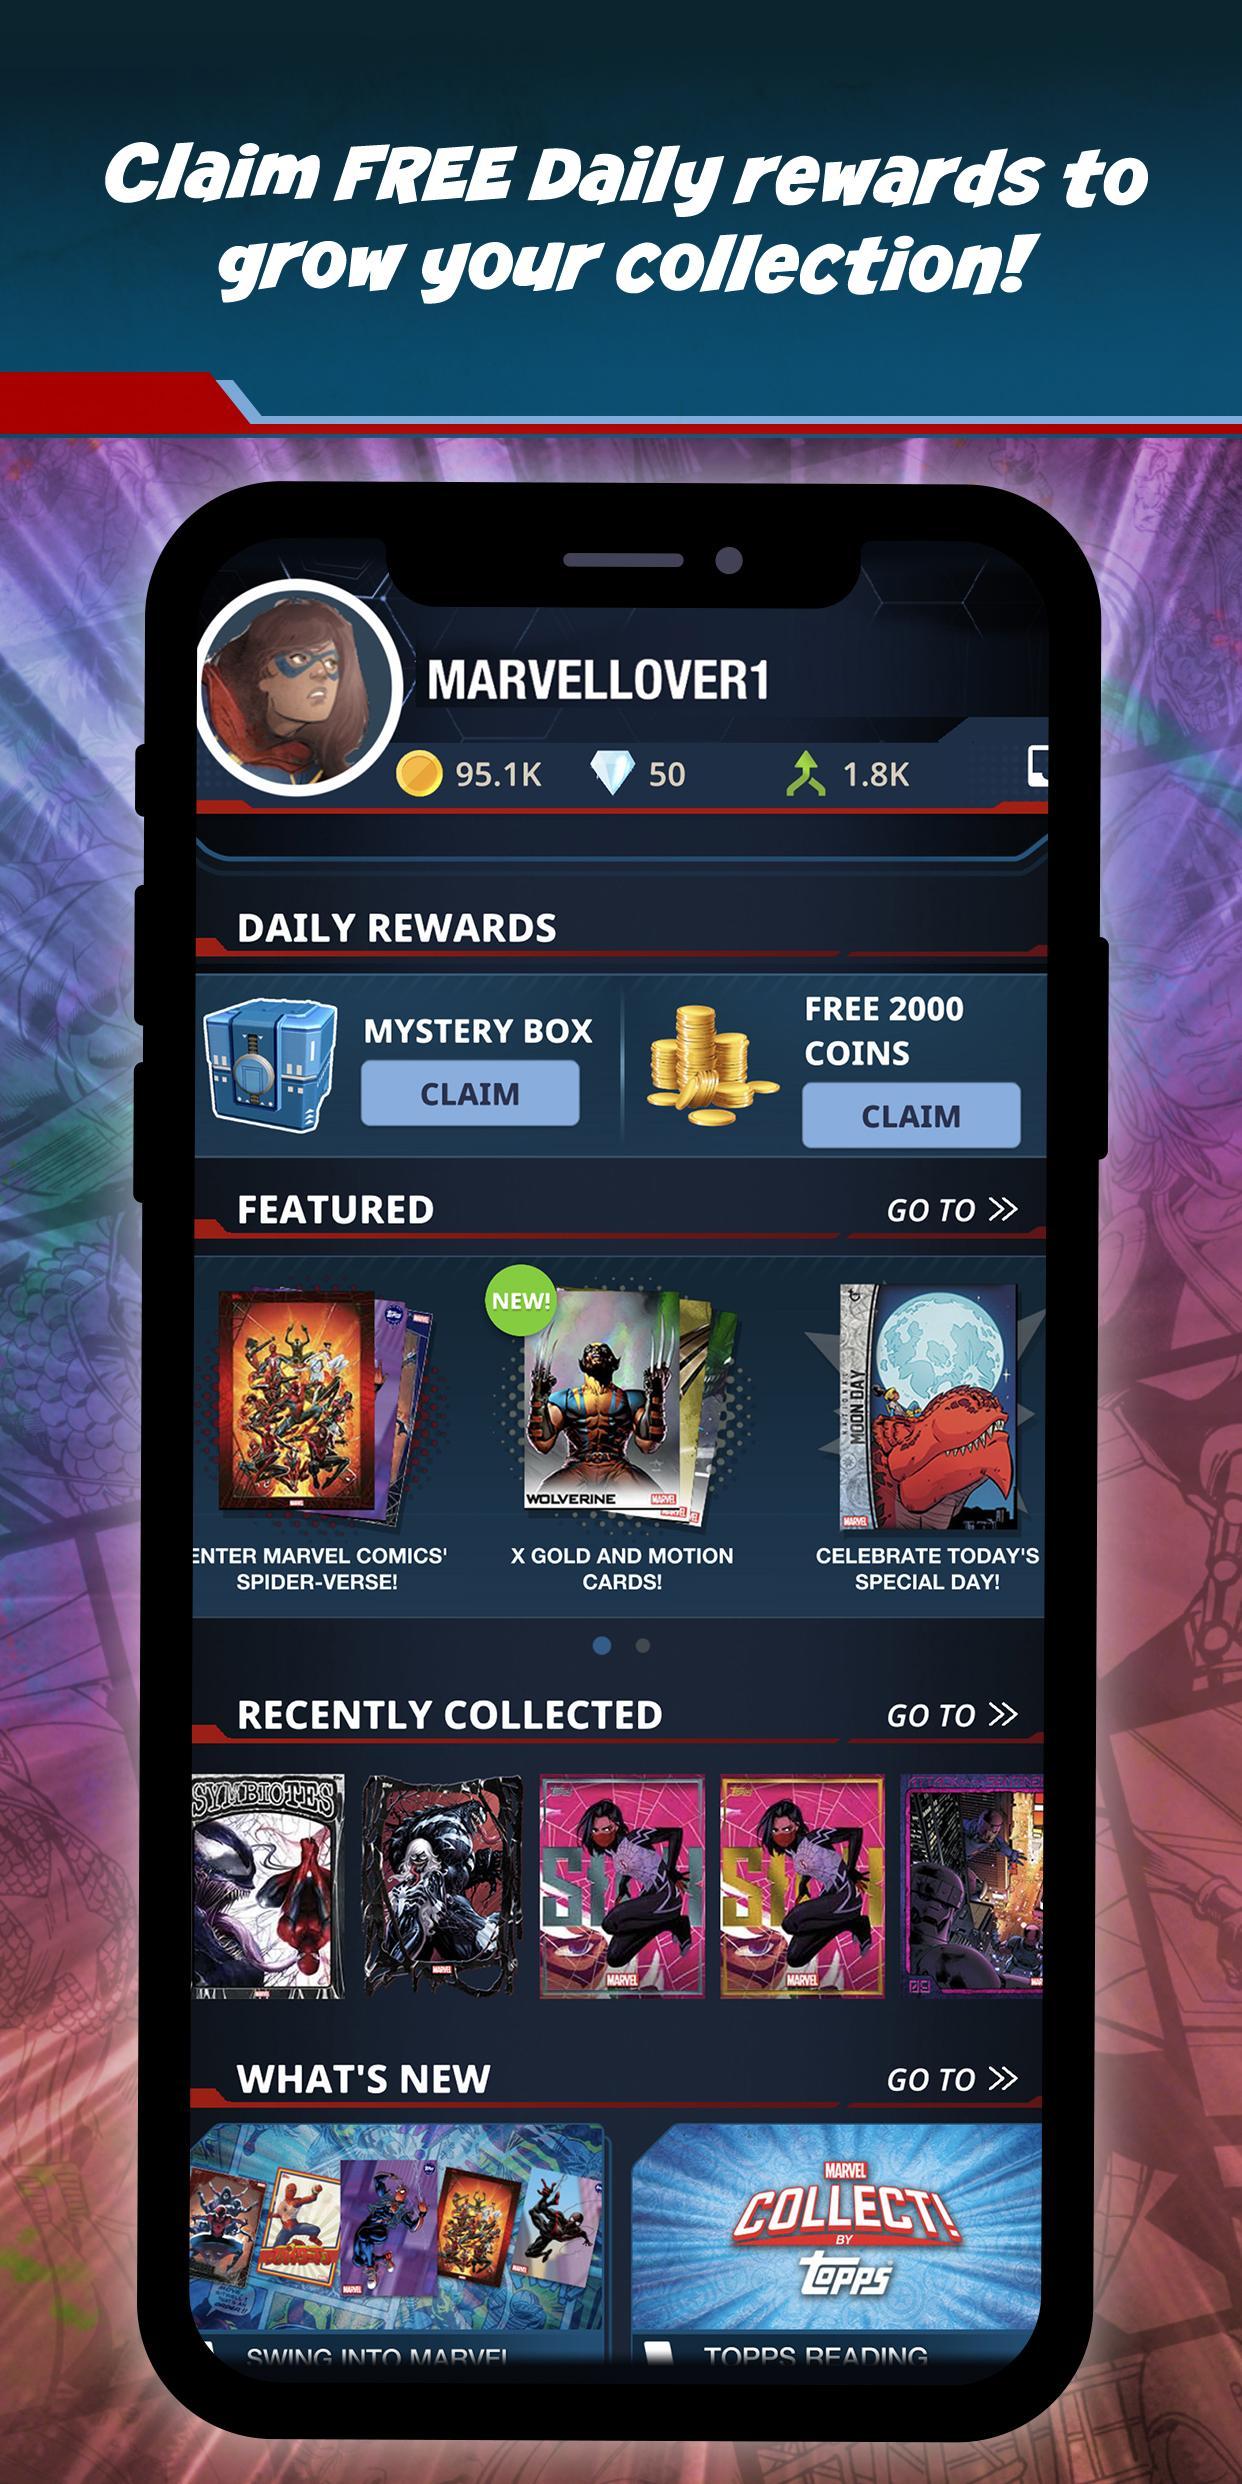 Marvel Collect! by Topps Card Trader 14.0.0 Screenshot 6